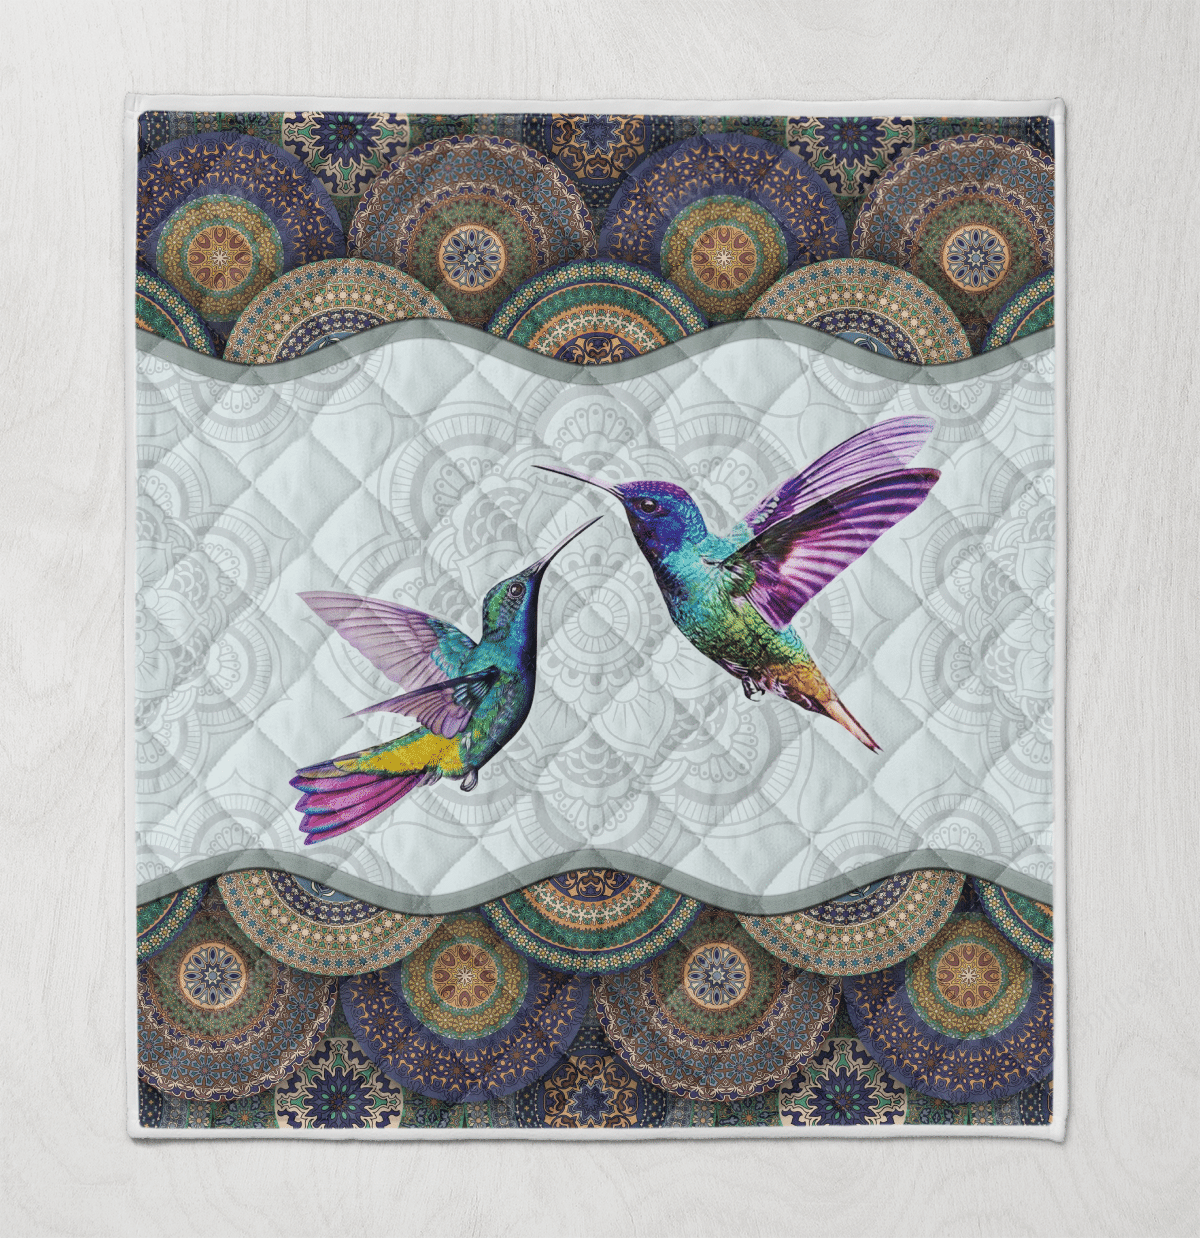 Wonderful Hummingbird Couple Mandala Quilt Gift For Hummingbird Lovers Birthday Gift Home Decor Bedding Couch Sofa Soft and Comfy Cozy